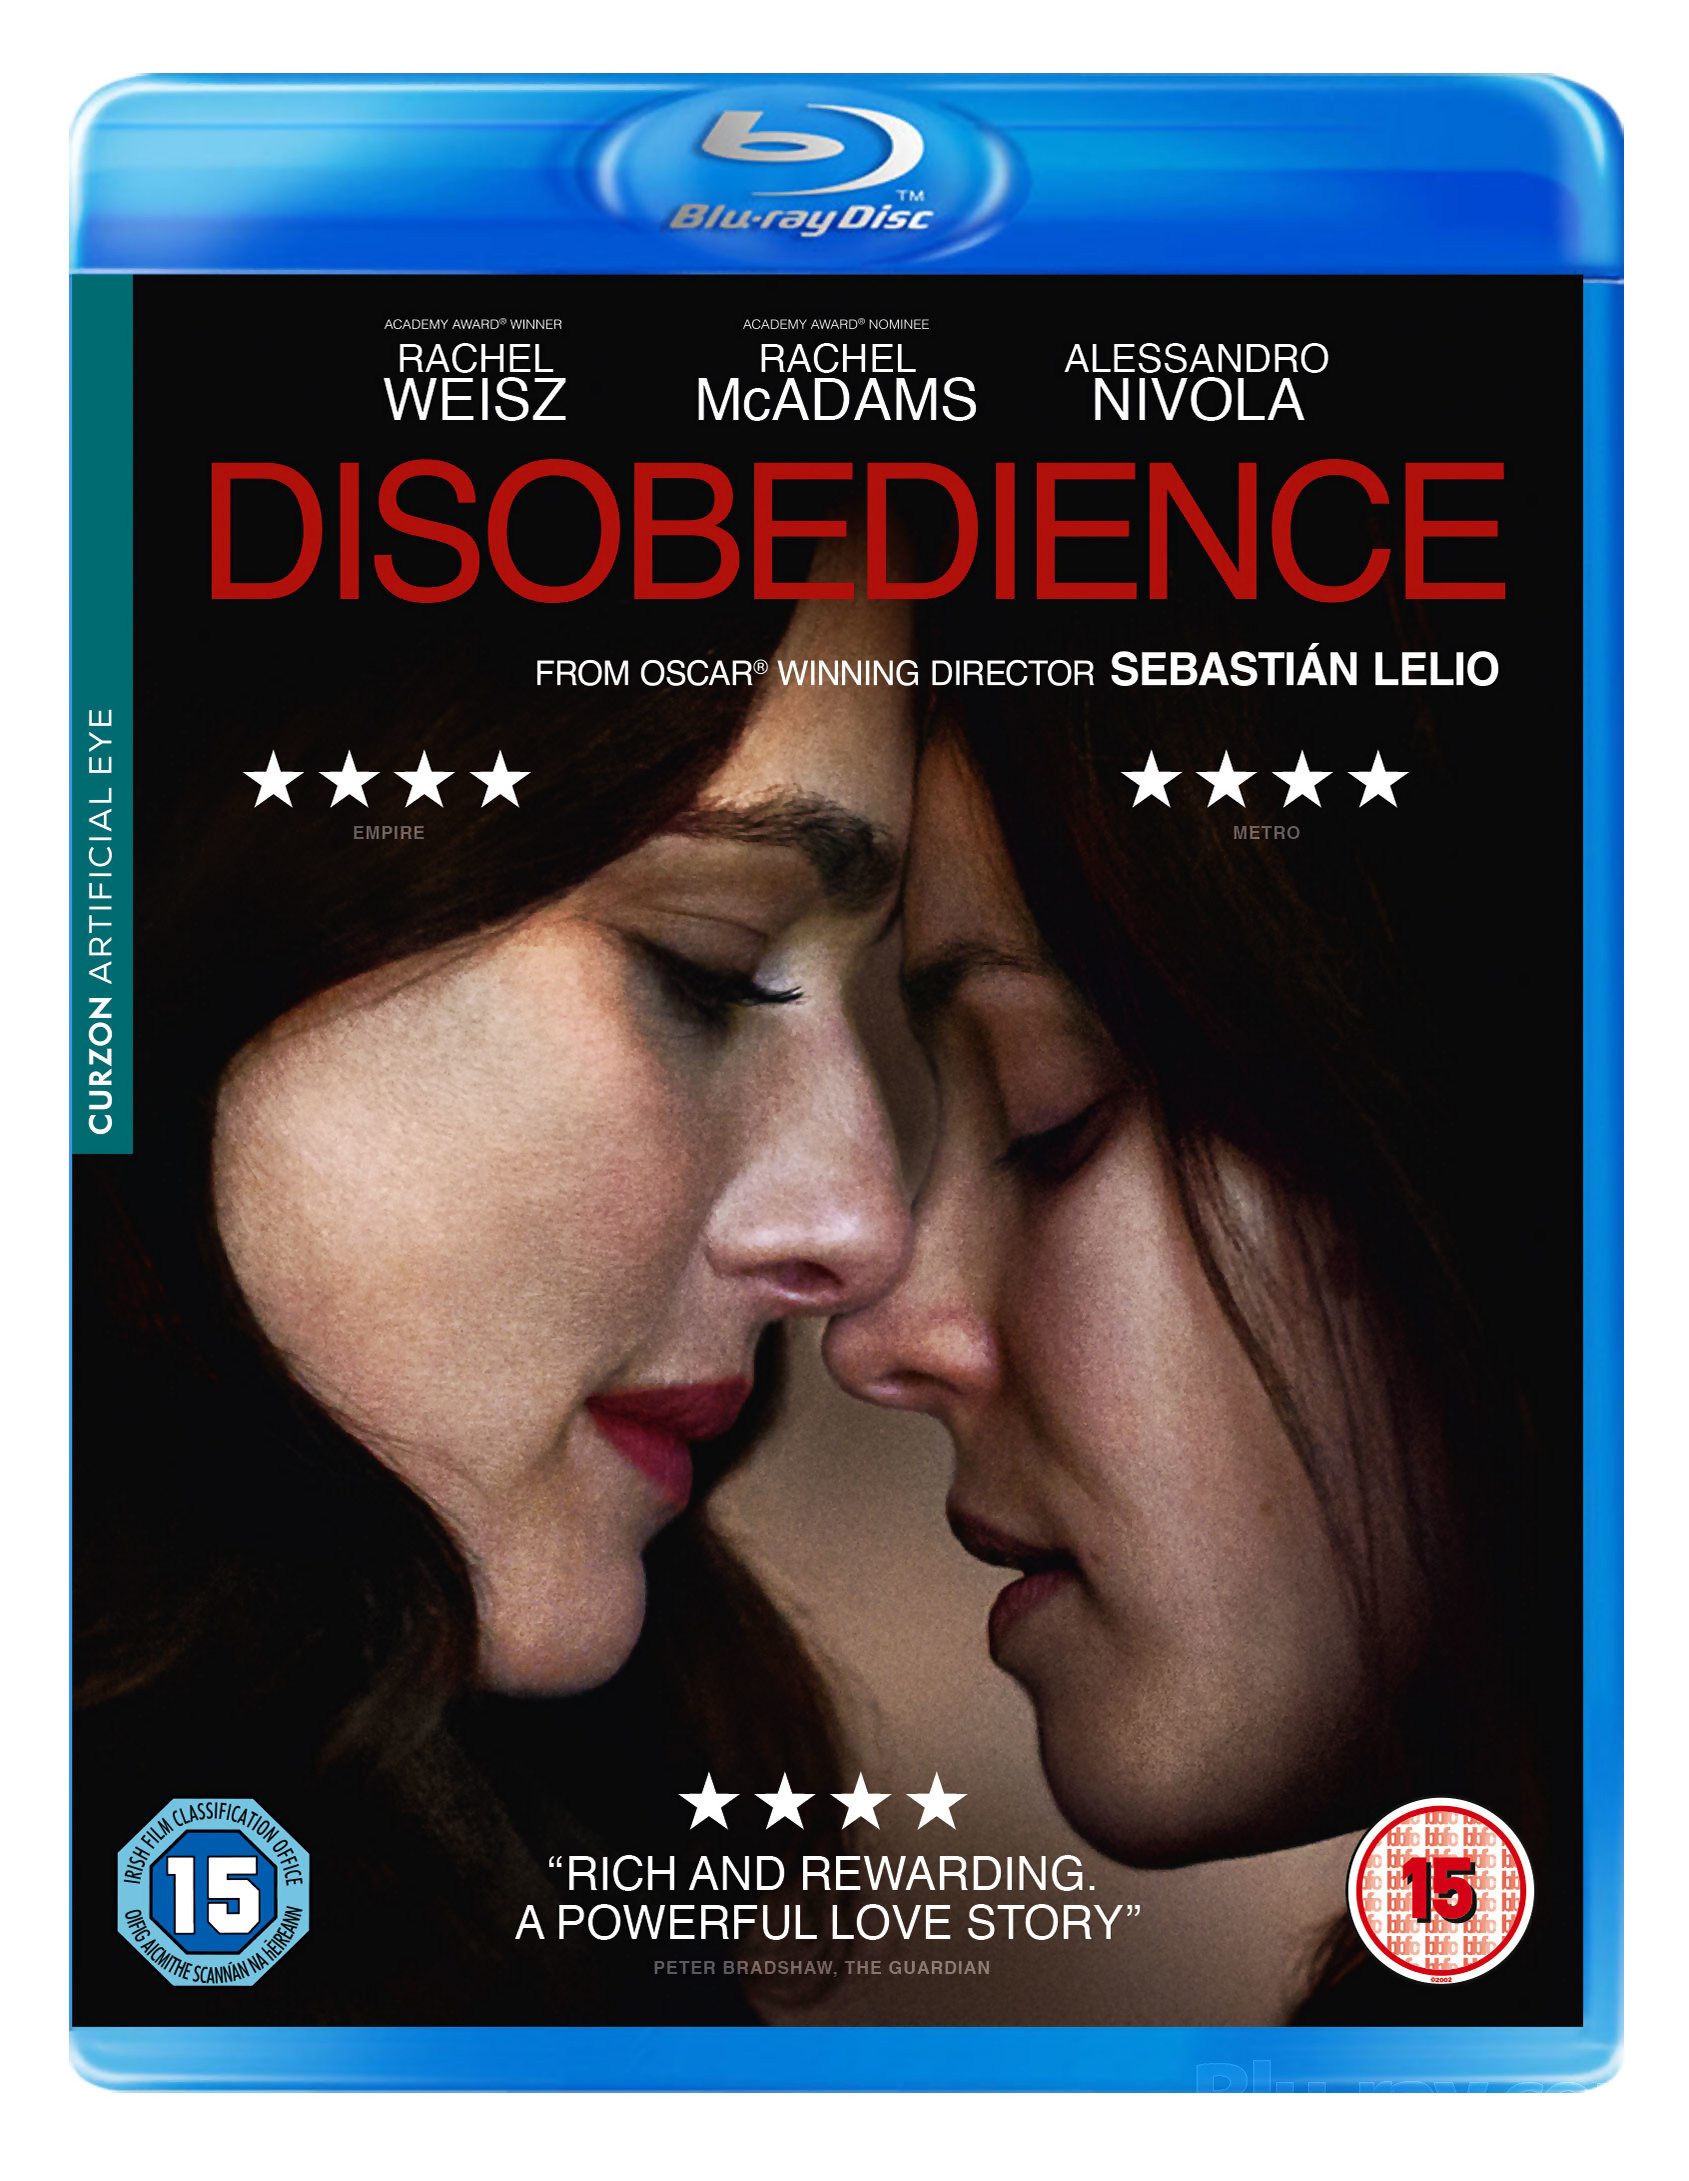 First watch: 'Disobedience' trailer - The Jewish Chronicle